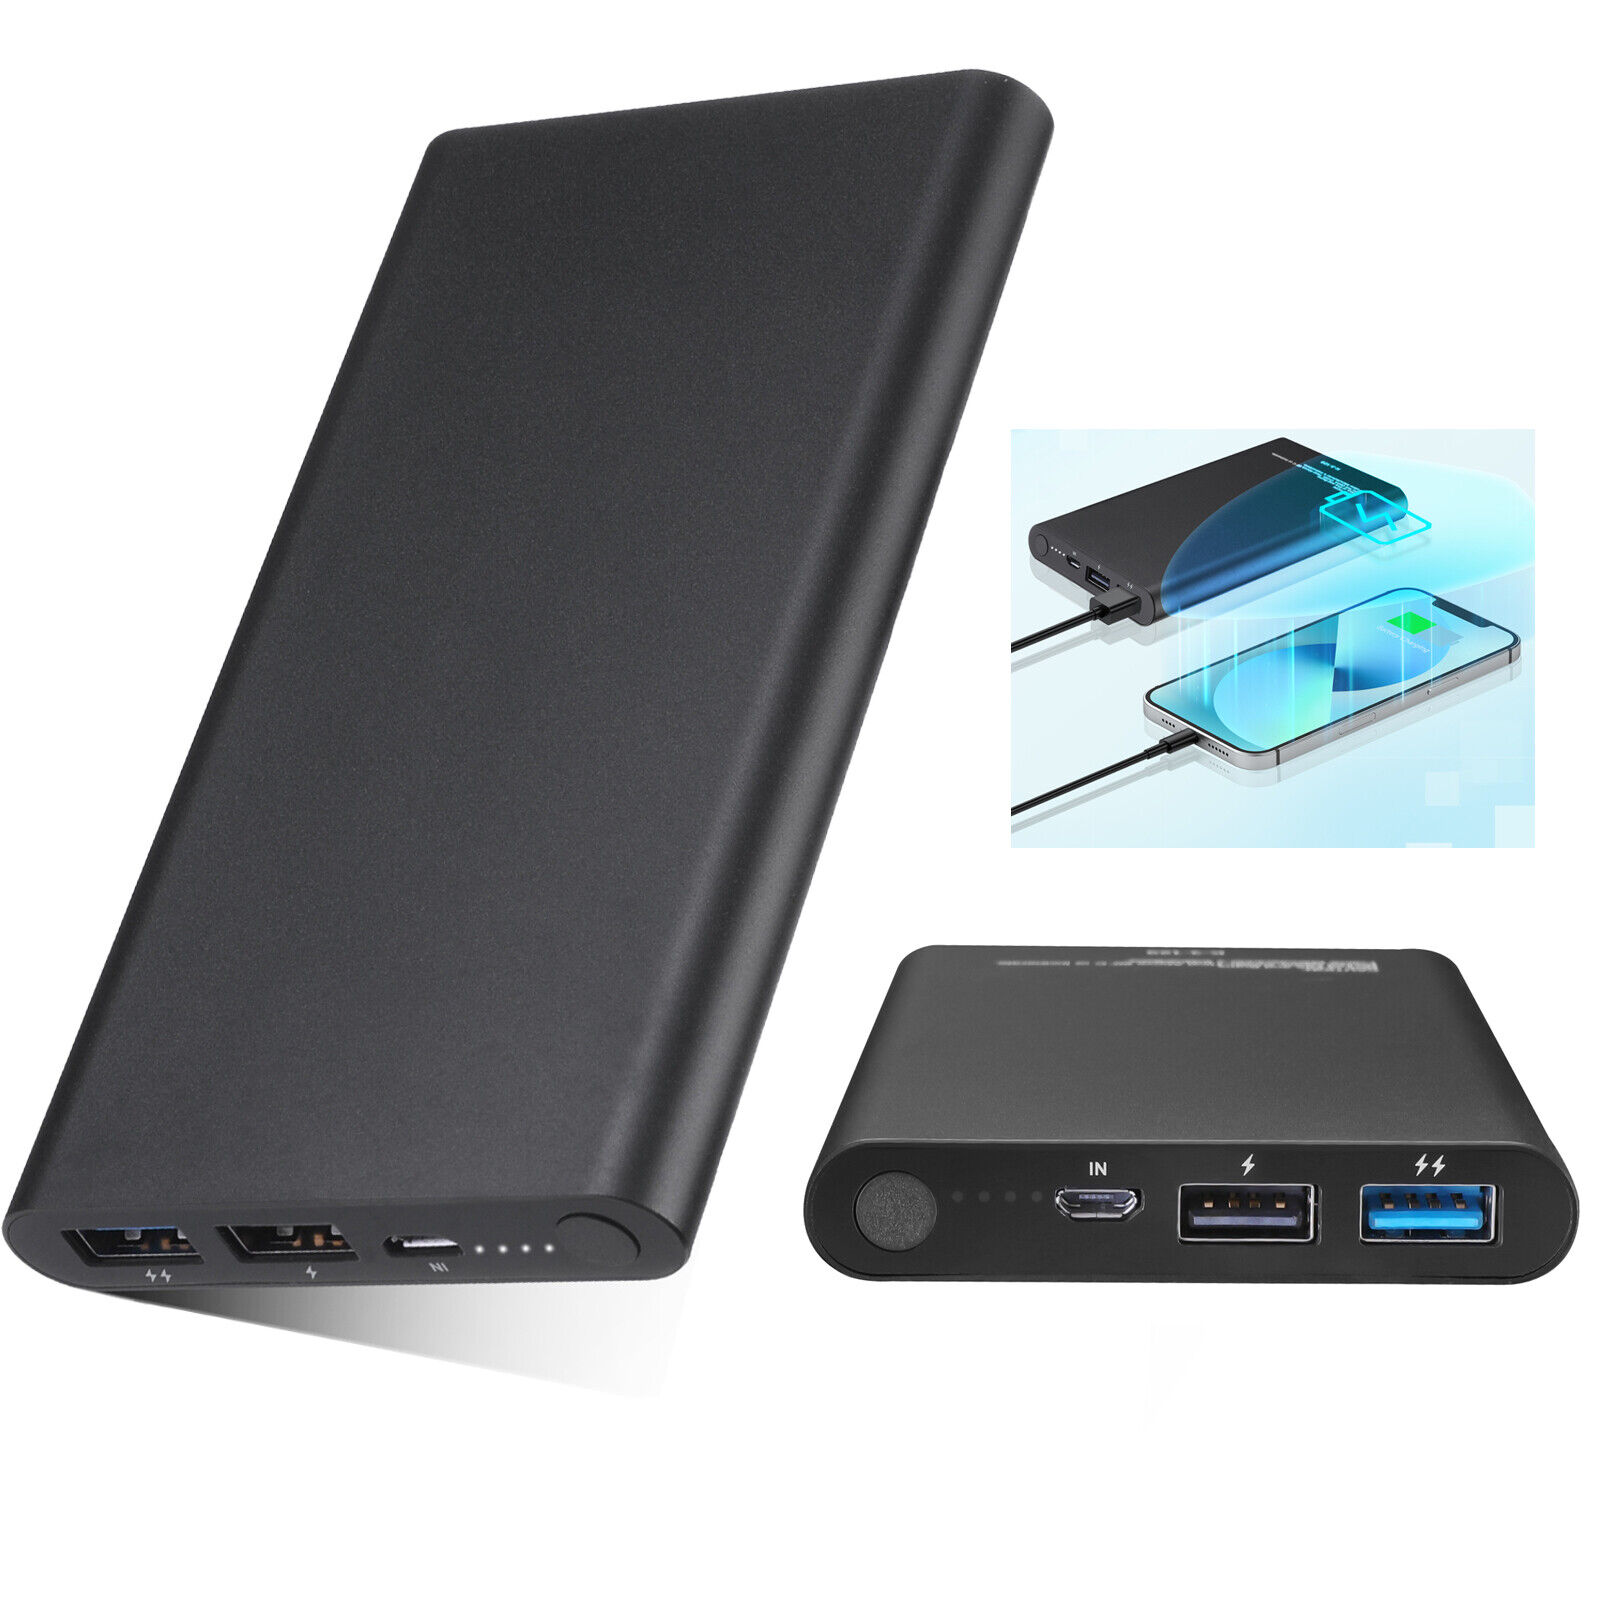 AWAY Power Bank 10000mah Dual USB Aluminum Portable Charger for Phone Tablets